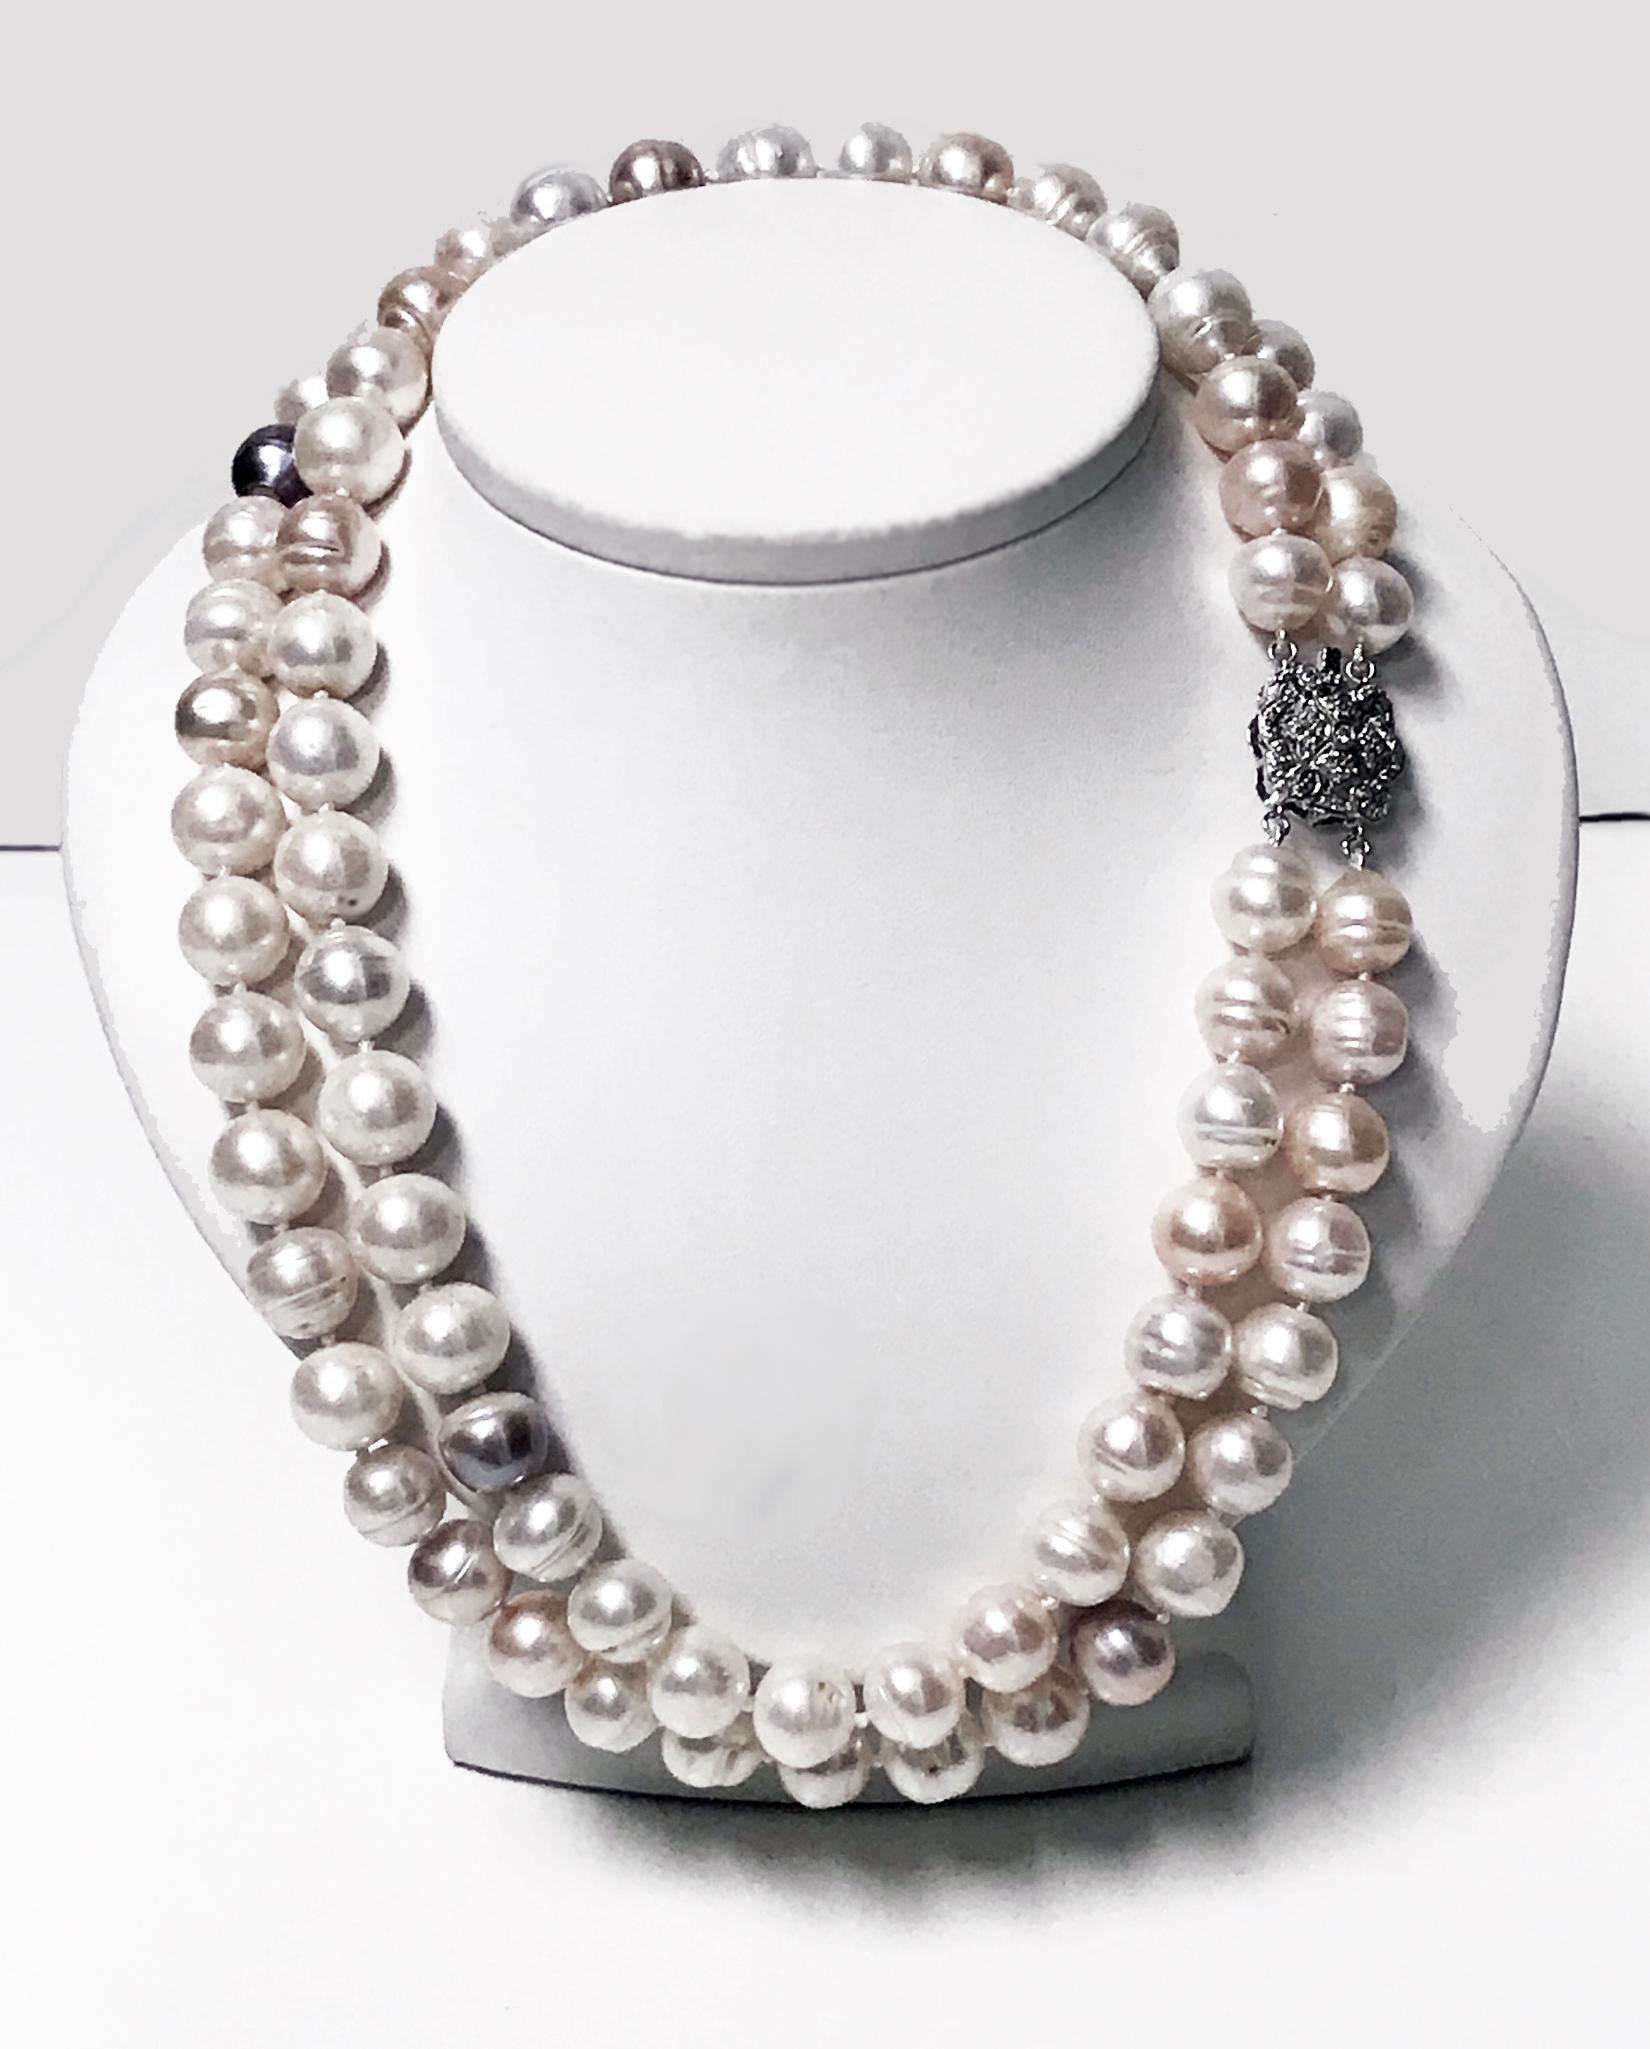 10.50 -11.50 mm Freshwater Cultured Pearl double Necklace, 14K white gold Diamond clasp. Two 18 inch strands (36 inch total), off round mixed colour, mainly white inter spaced with some lavender and pink, blemishes, medium-high lustre, seventy eight